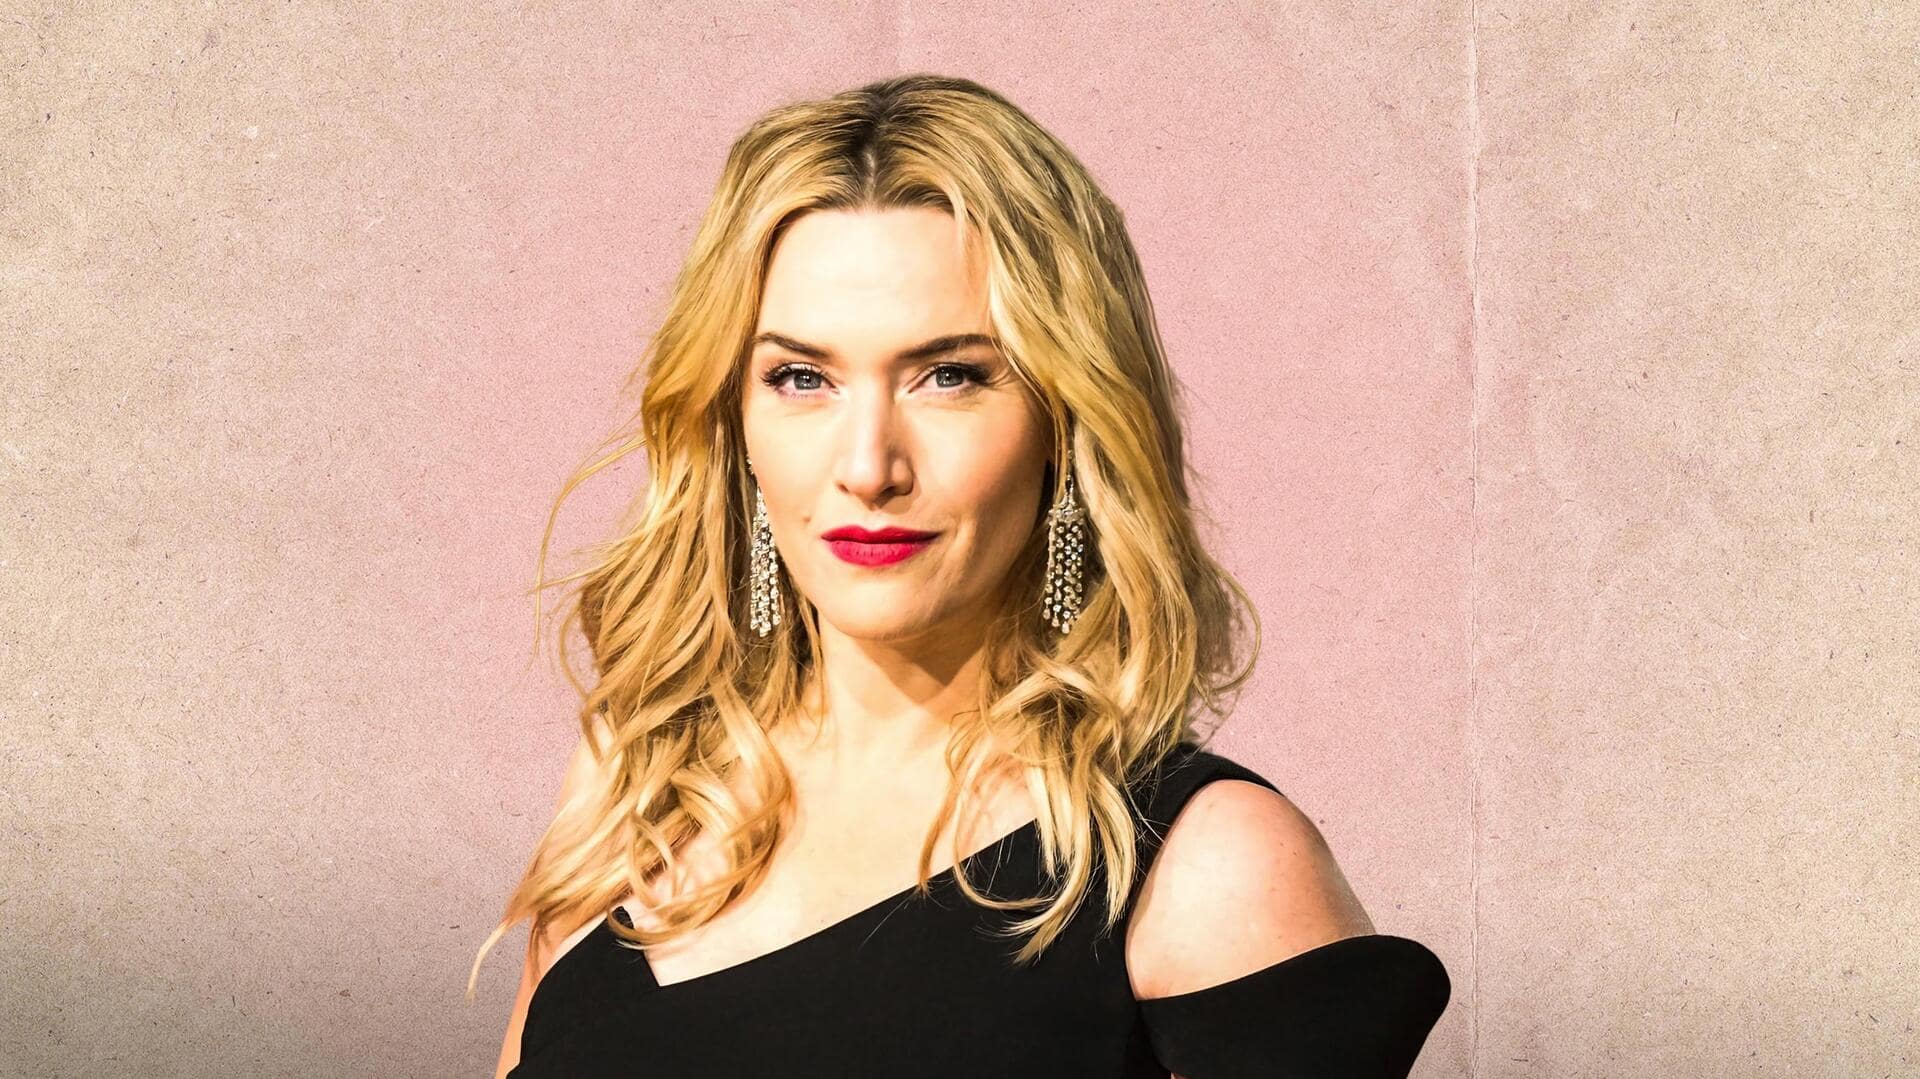 Happy birthday, Kate Winslet! Sharing the 'Titanic' actor's beauty secrets